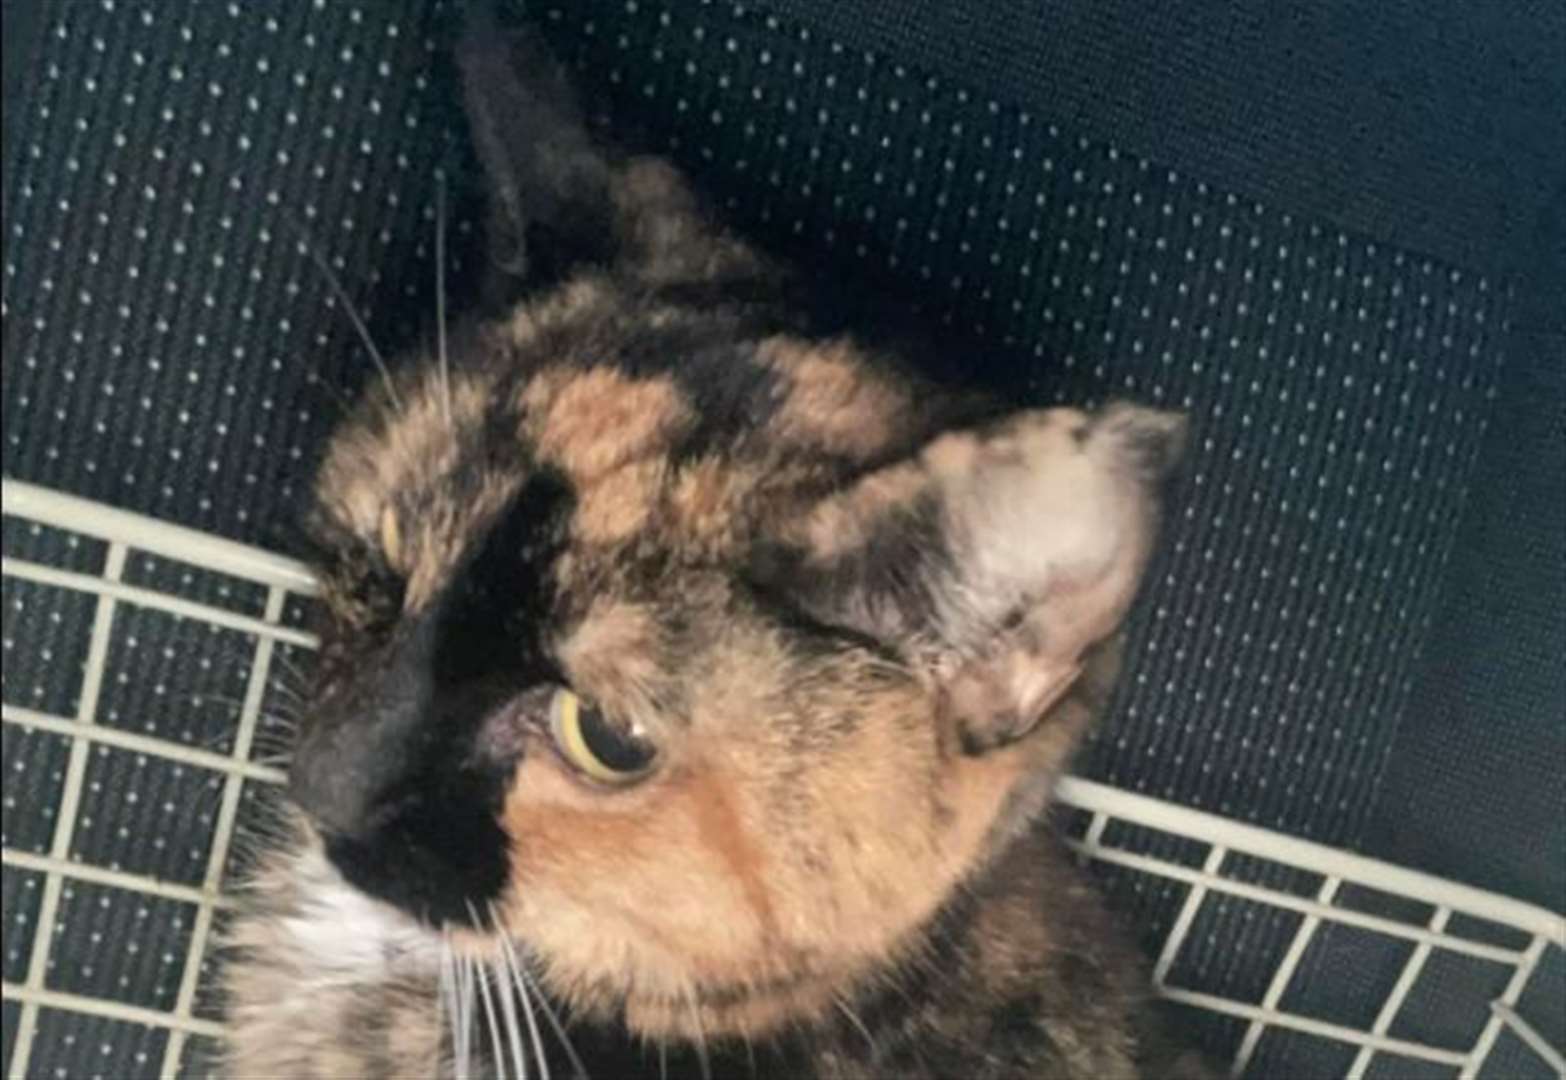 Owner's plea after cat's meat packaging death